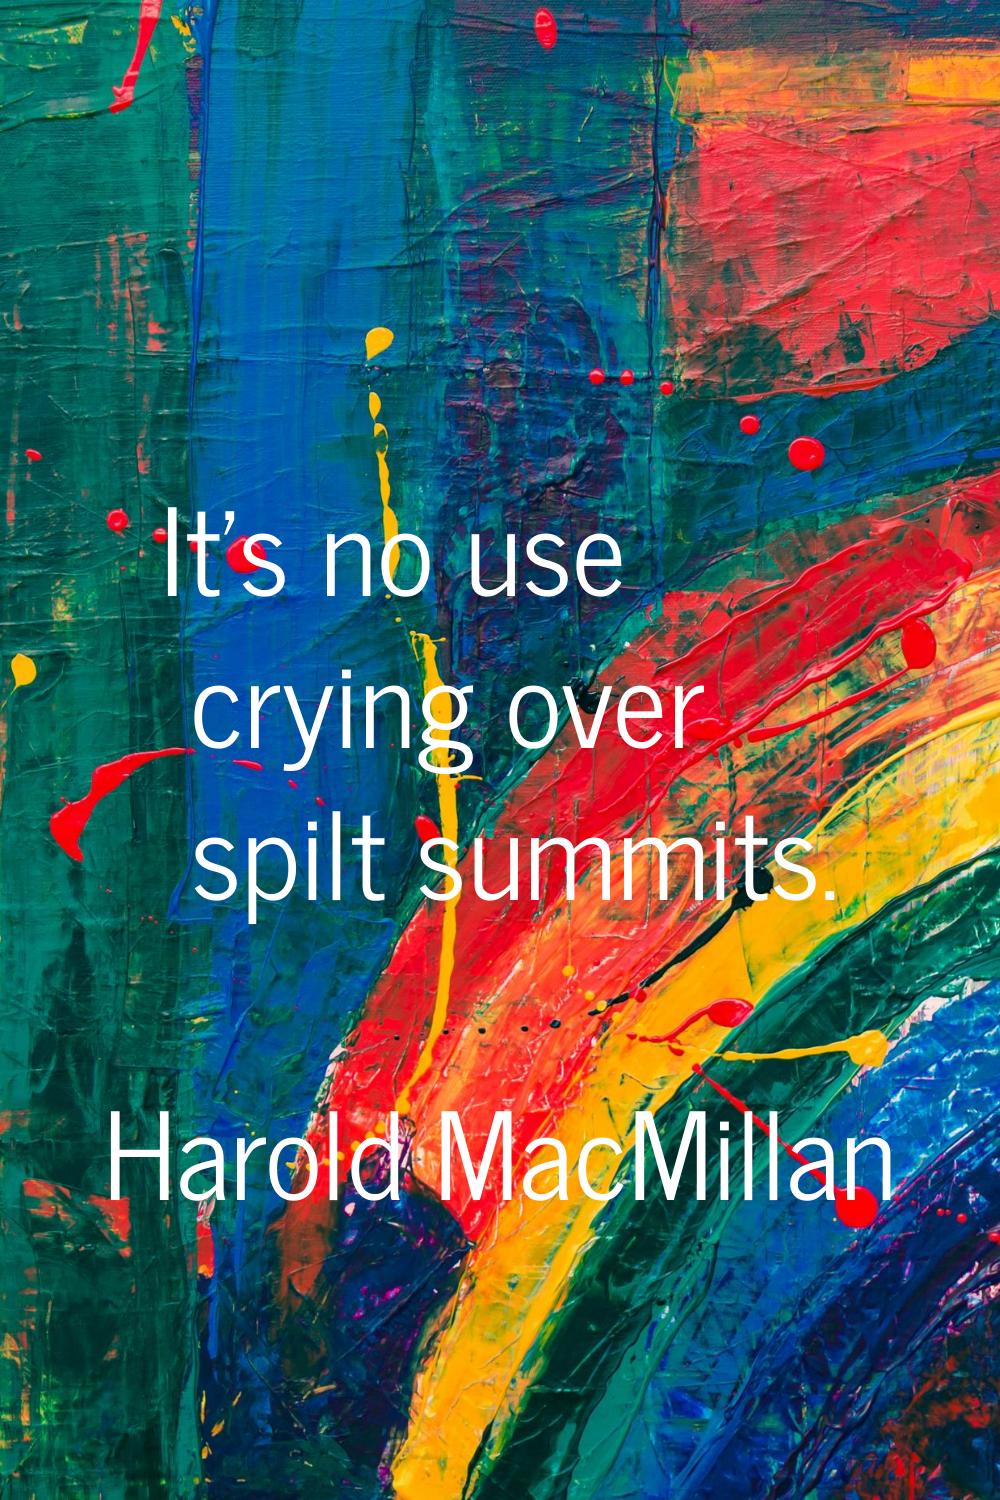 It's no use crying over spilt summits.